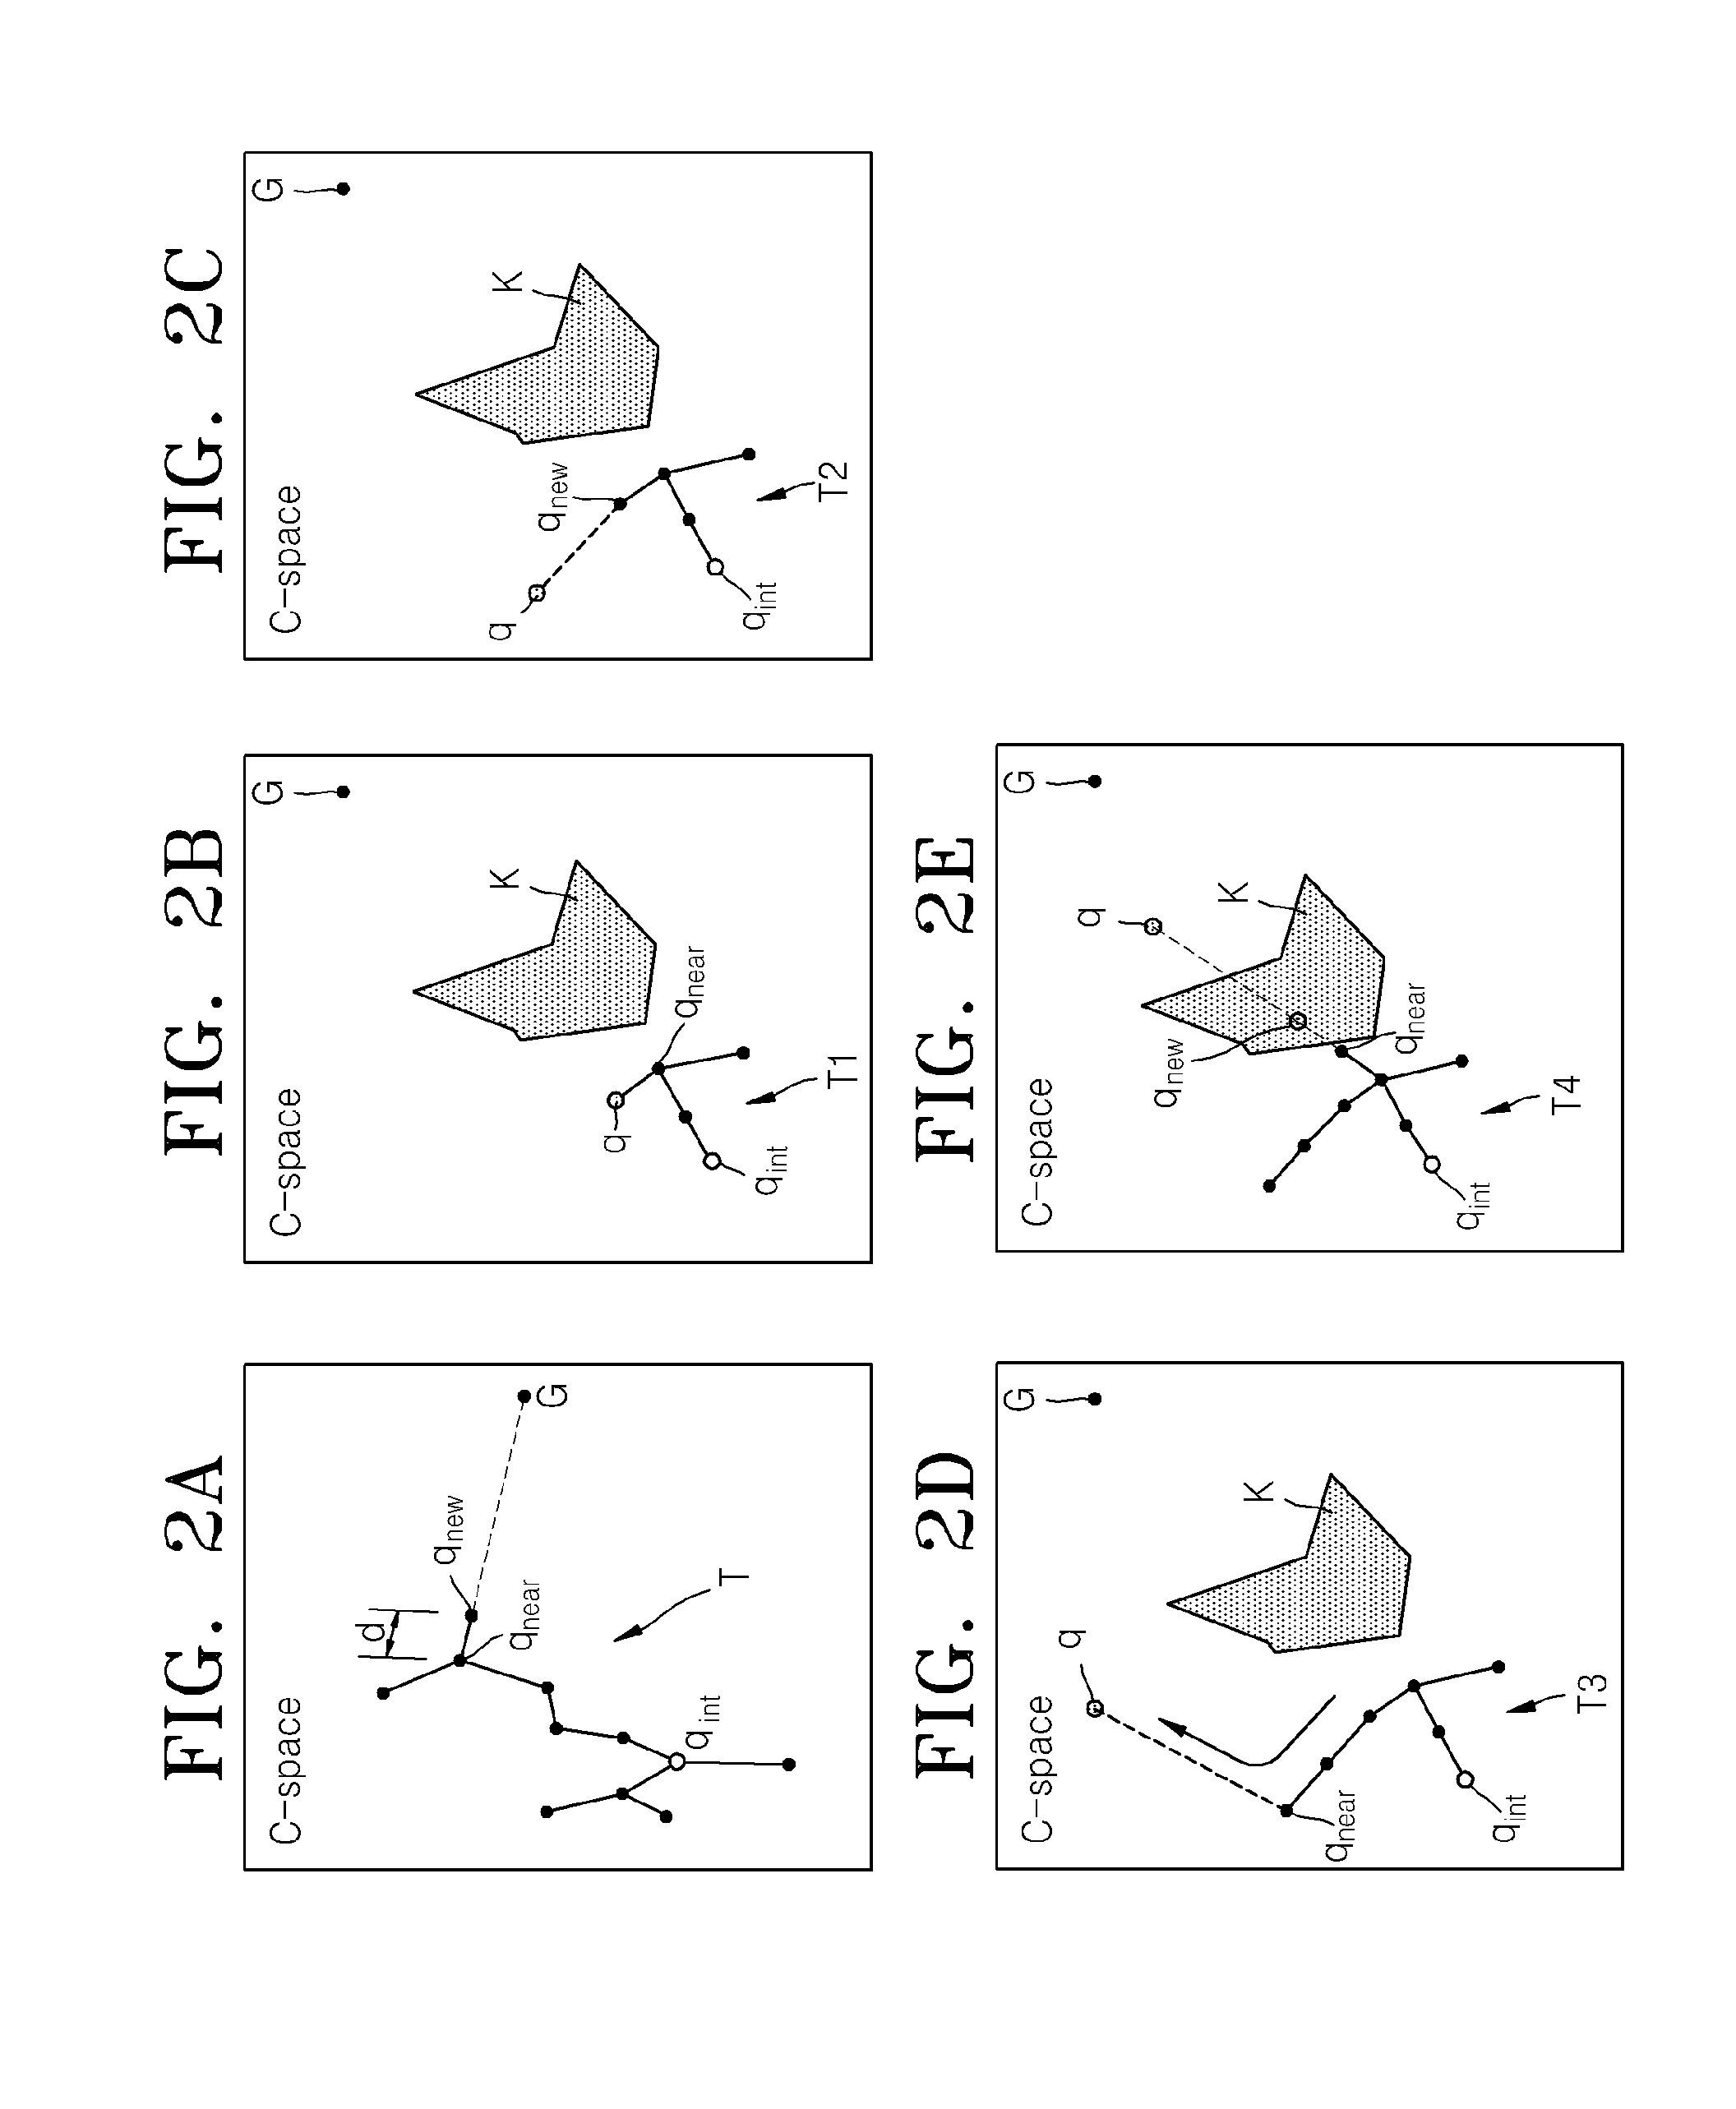 Apparatus and method for planning path of robot, and the recording media storing the program for performing the method